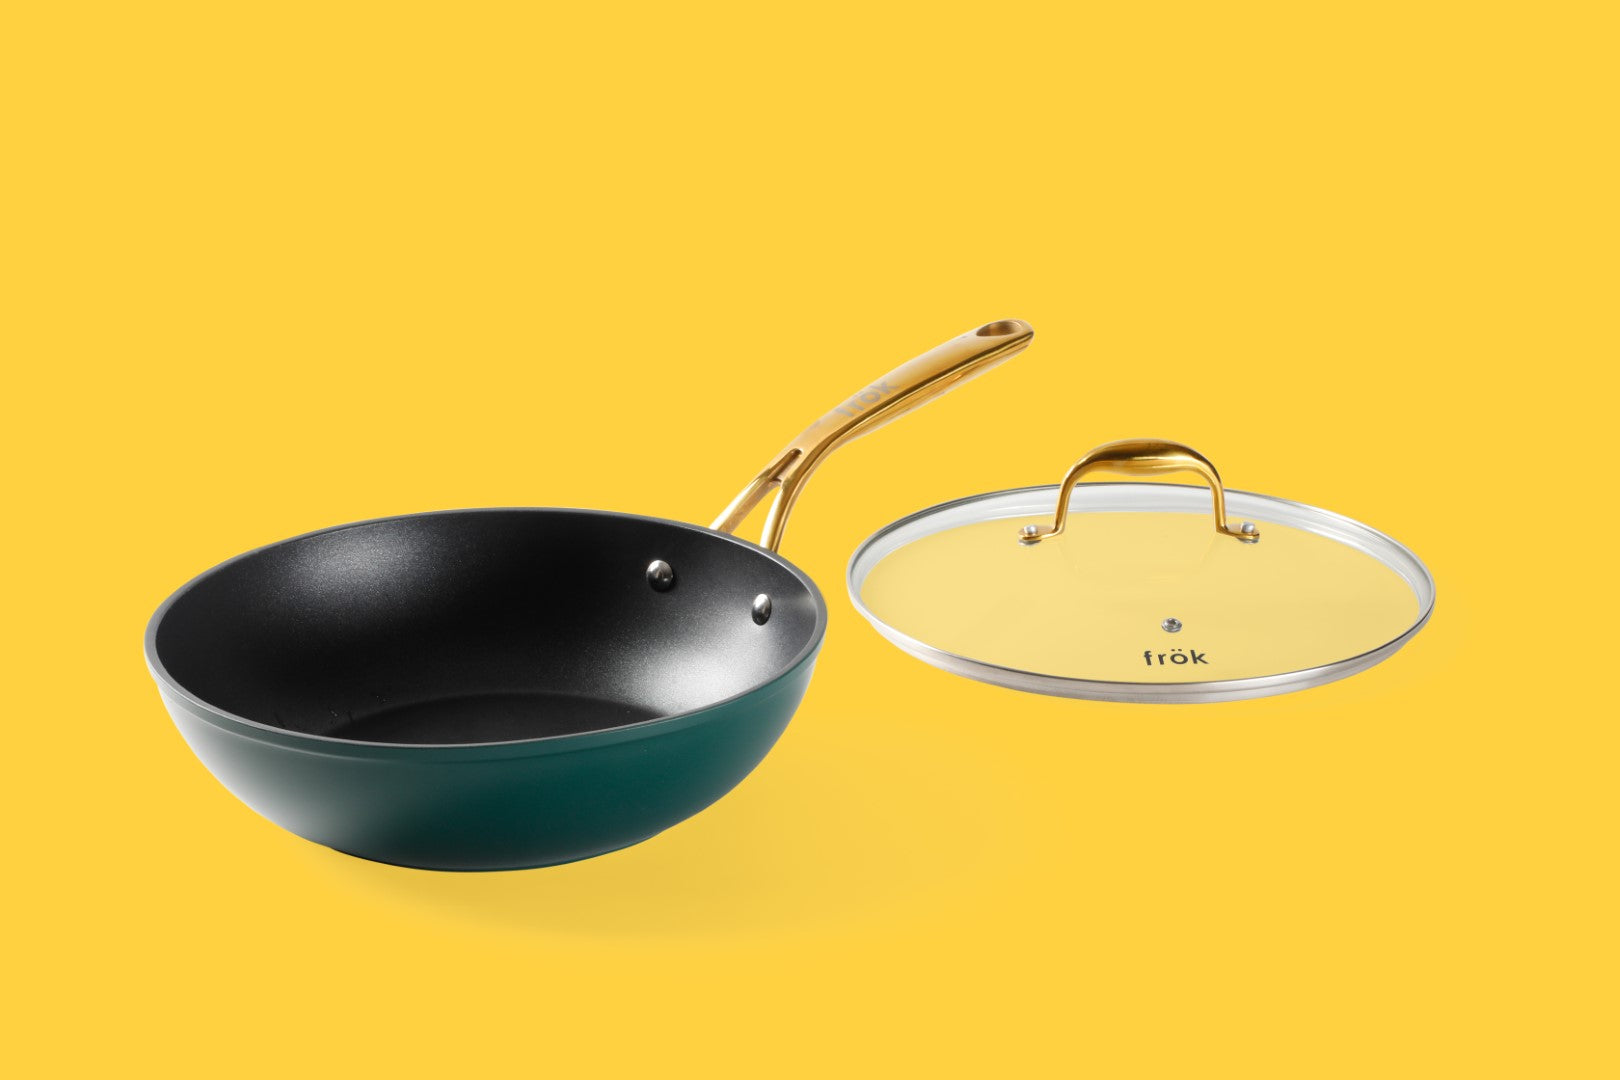  Customer reviews: frök All-In-One Non-Stick Fry Pan Meets Wok  with Lid, 11-Inch, Black & Gold